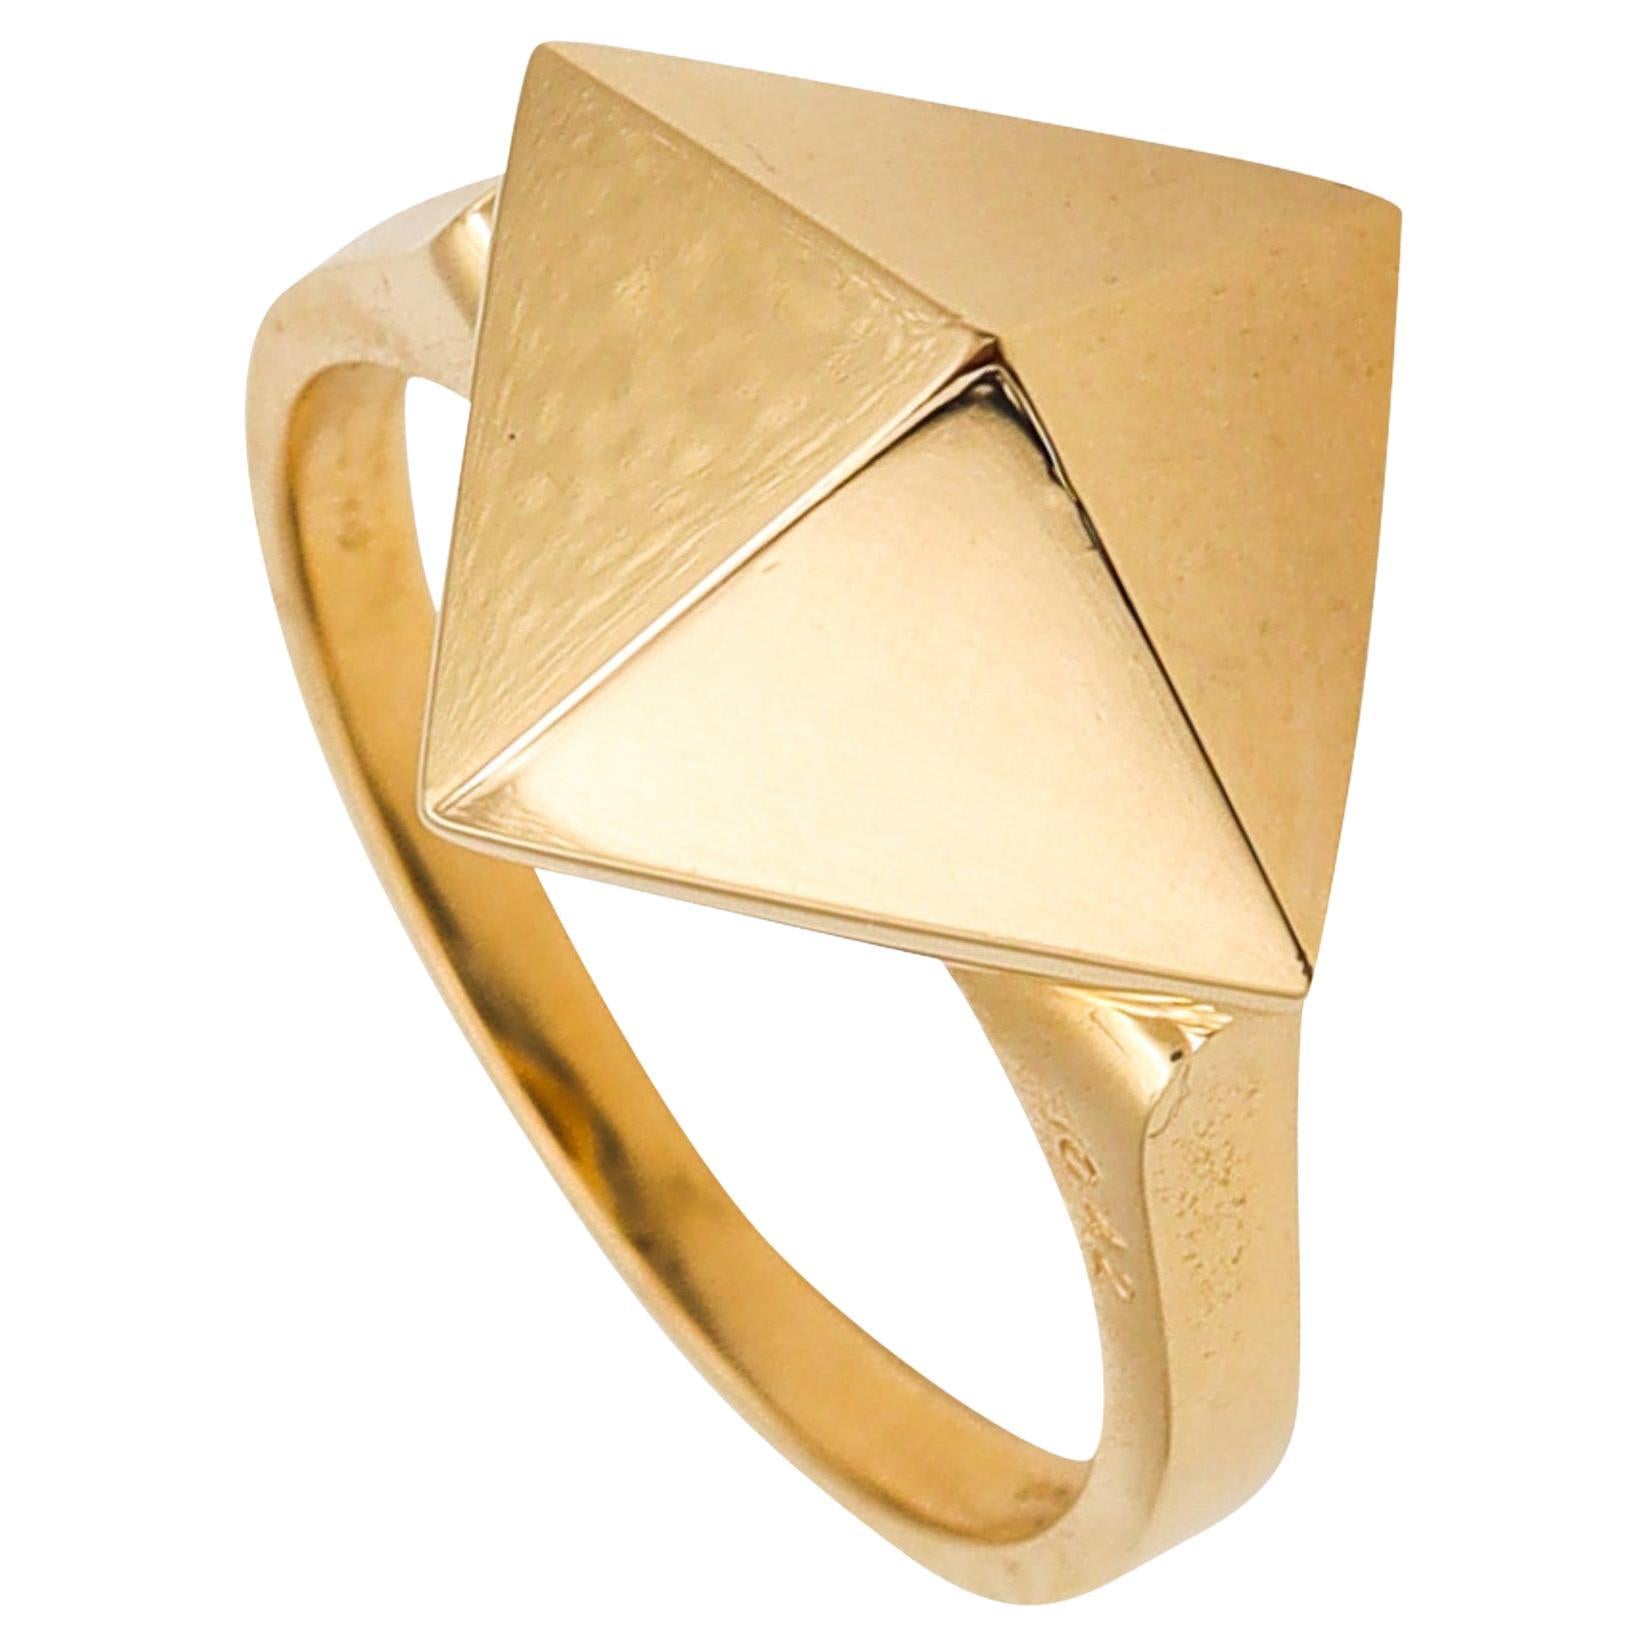 Aletto Brothers Stackable Small Triangular Geometric Ring in 18kt Yellow Gold